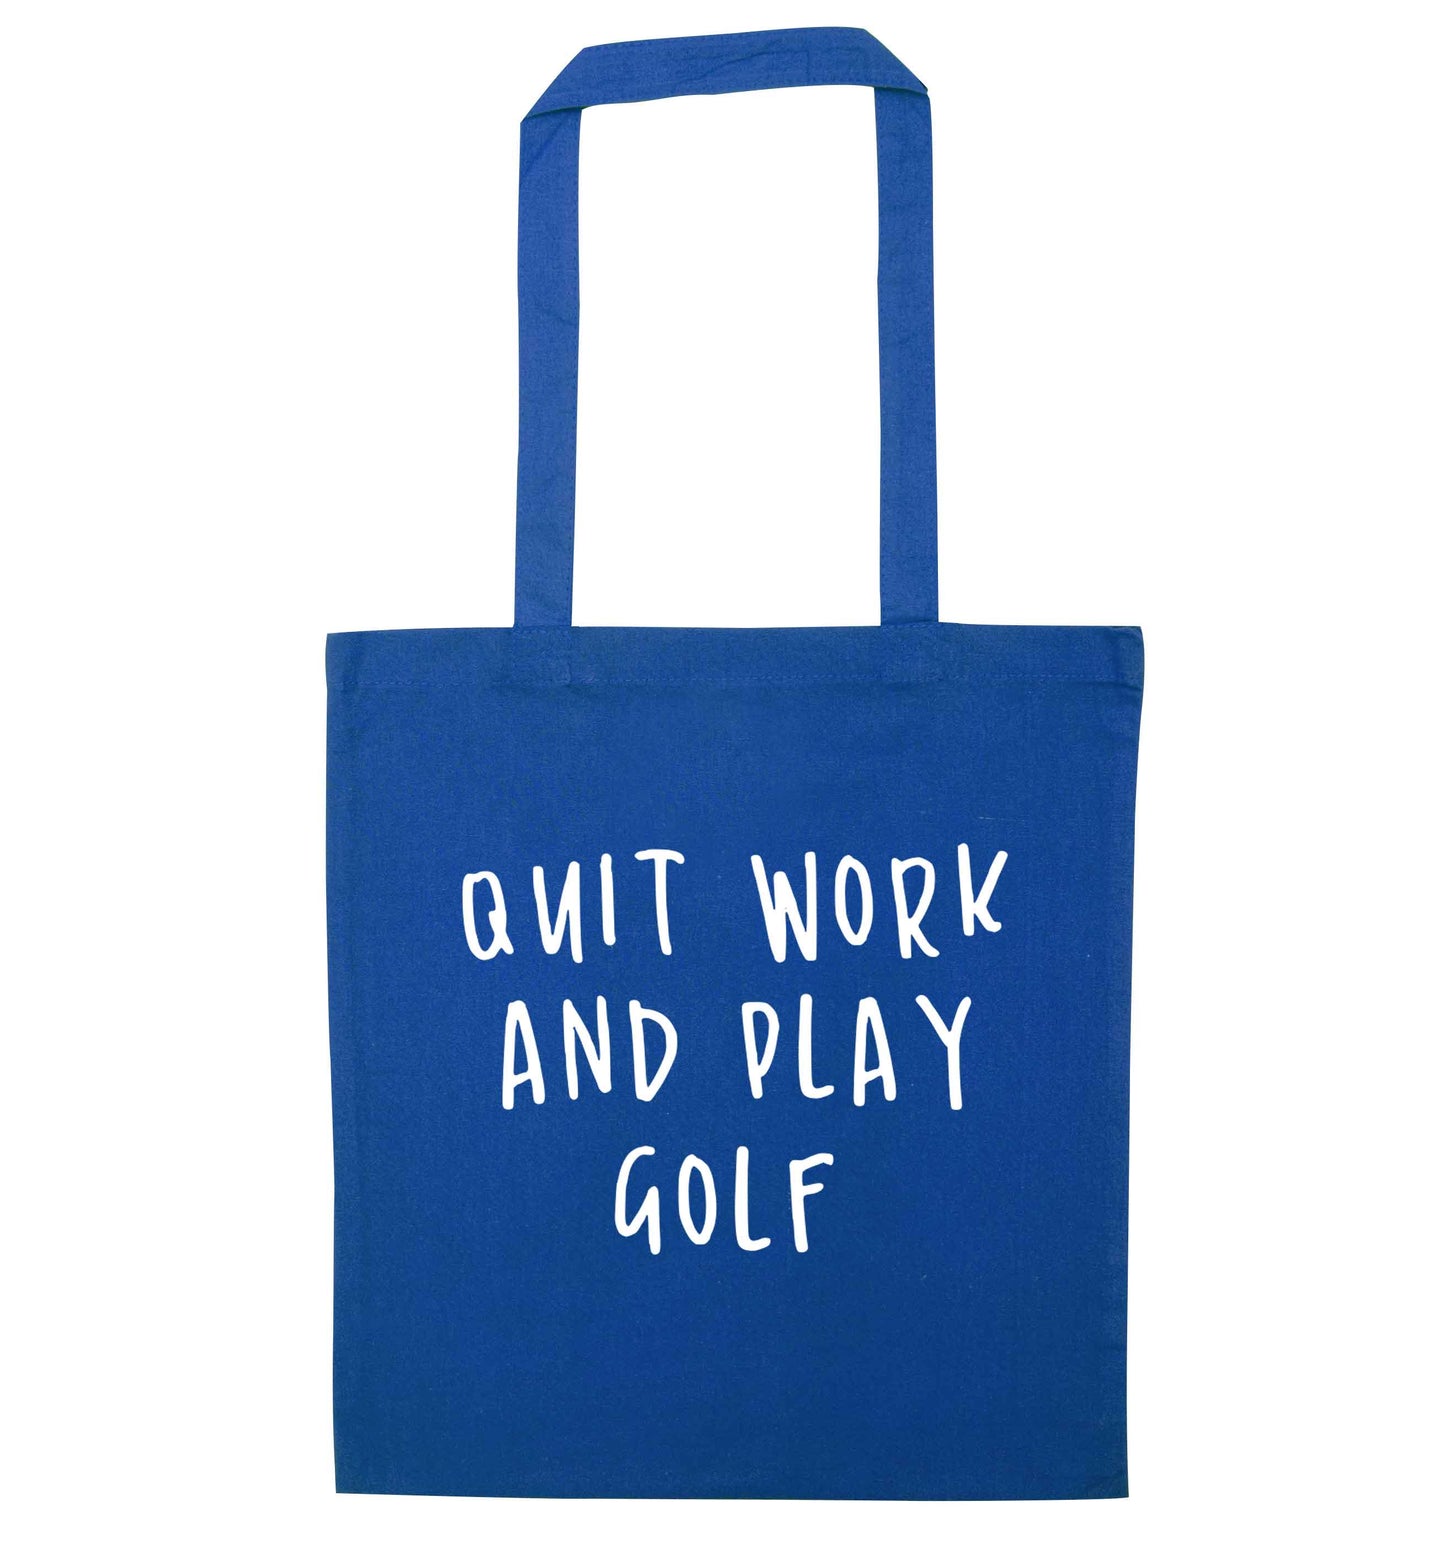 Quit work and play golf blue tote bag